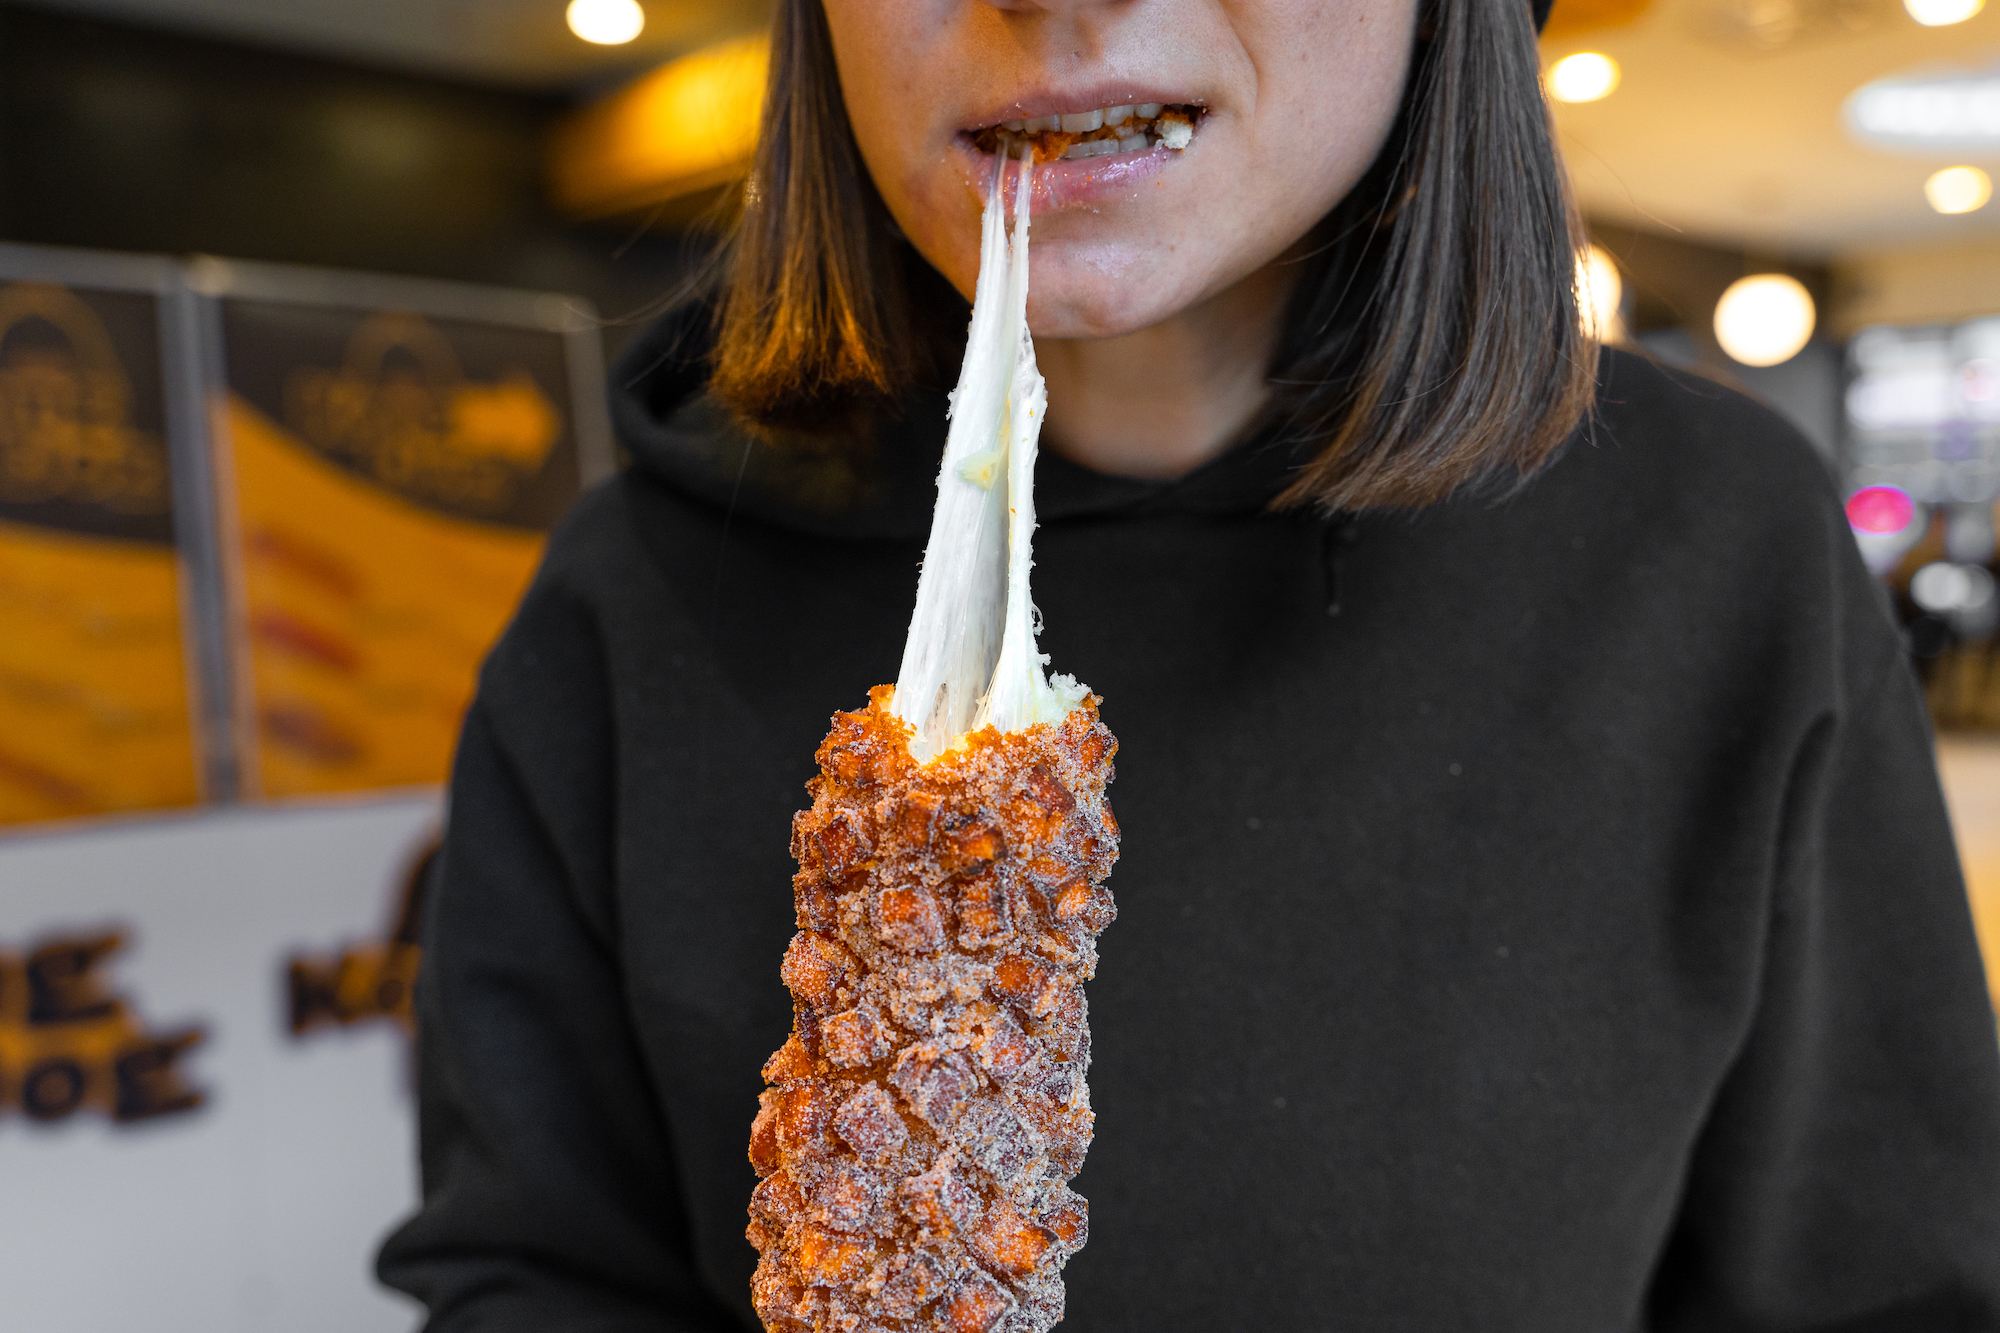 A woman pulls a string of cheese from a hot dog coated batter, sweet potato, and deep fried.